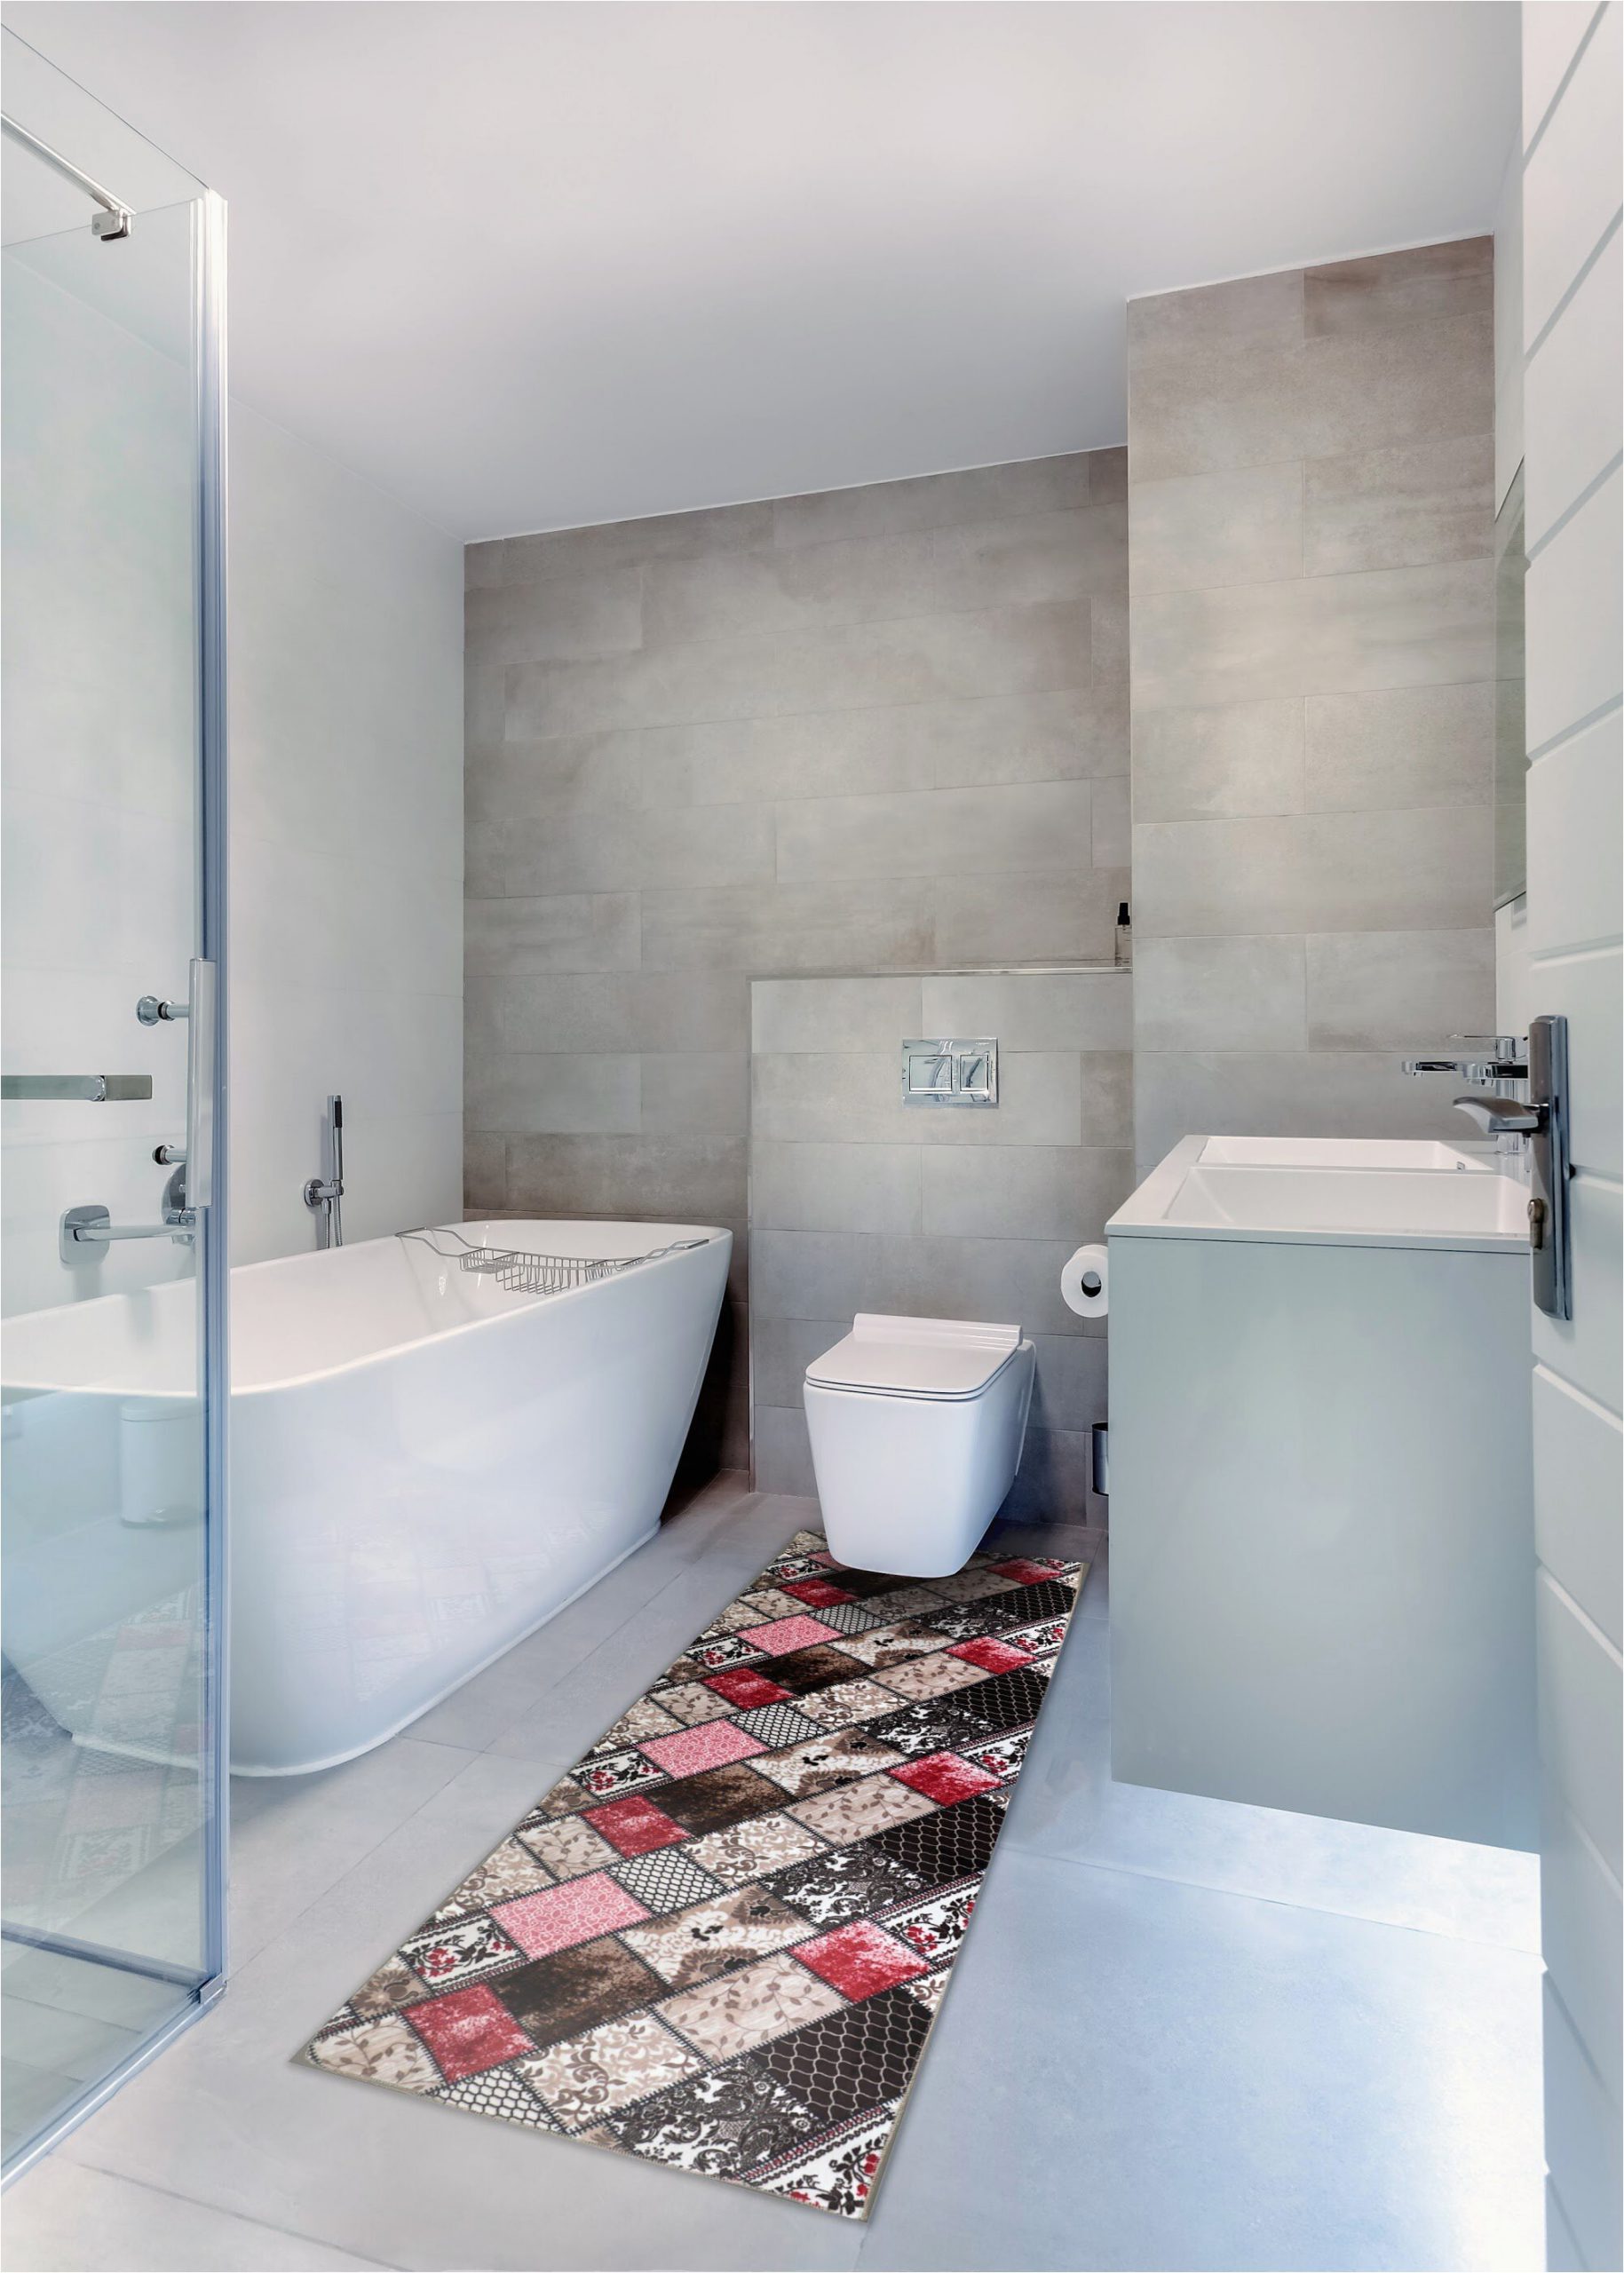 Red and Gray Bathroom Rugs Bunce Print Absorbent soft Multiple Non Slip Patchwork Bath Rug